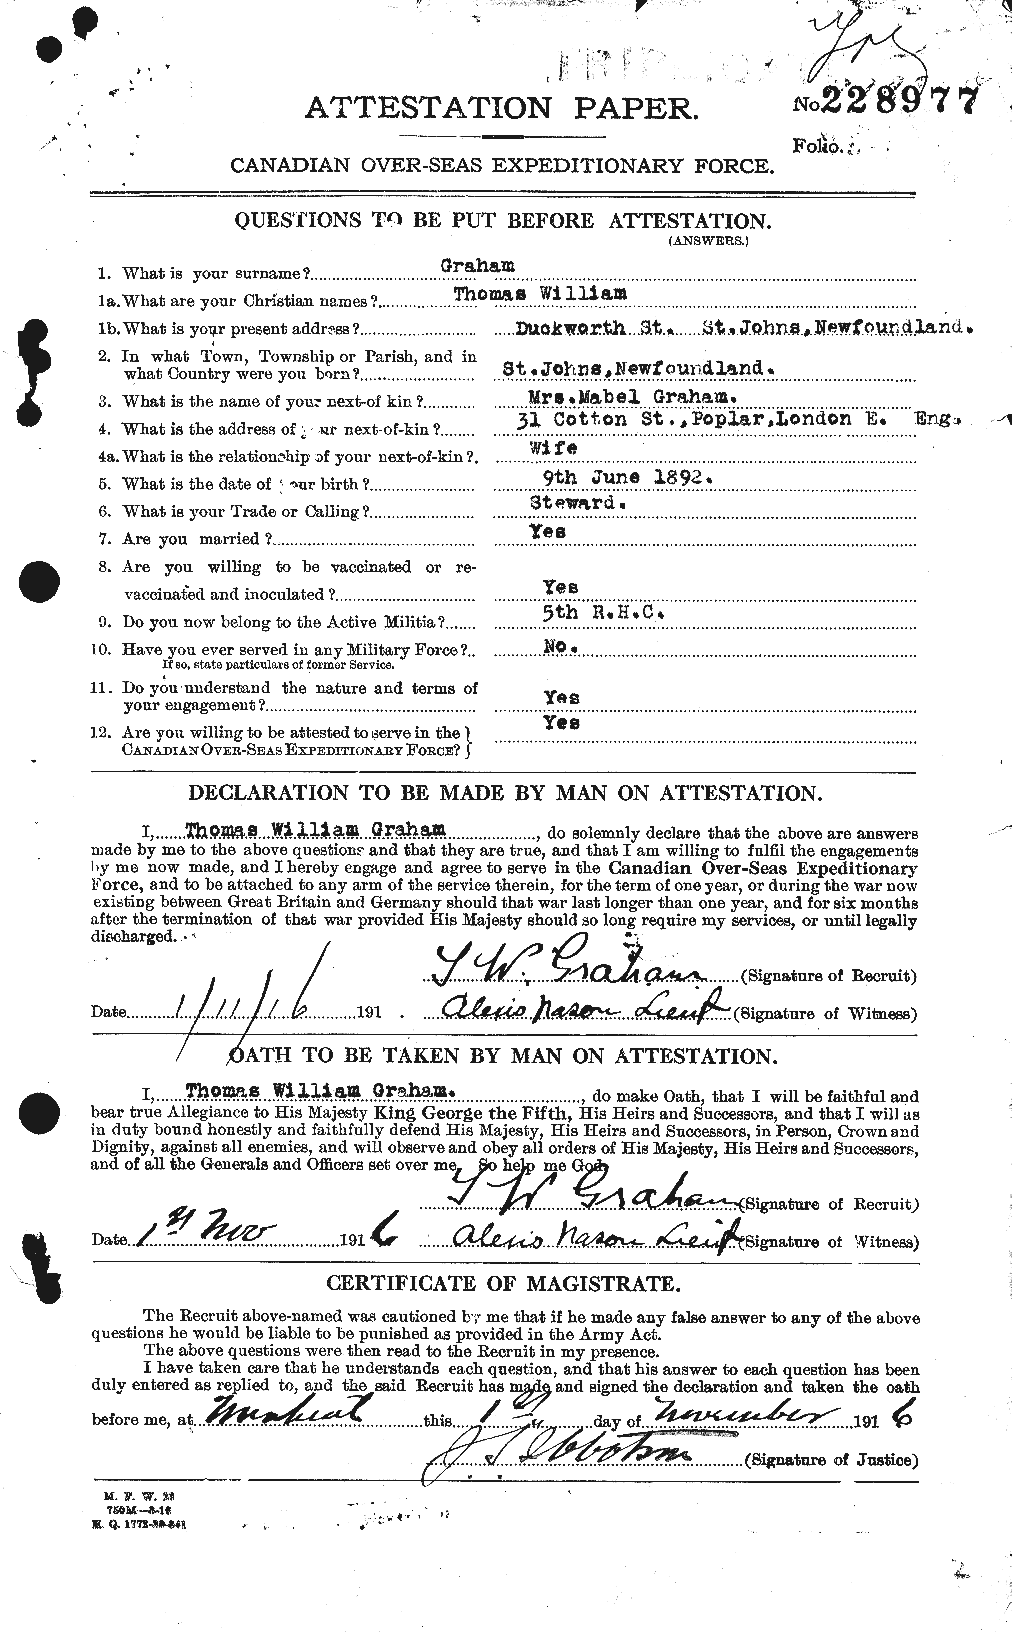 Personnel Records of the First World War - CEF 359530a